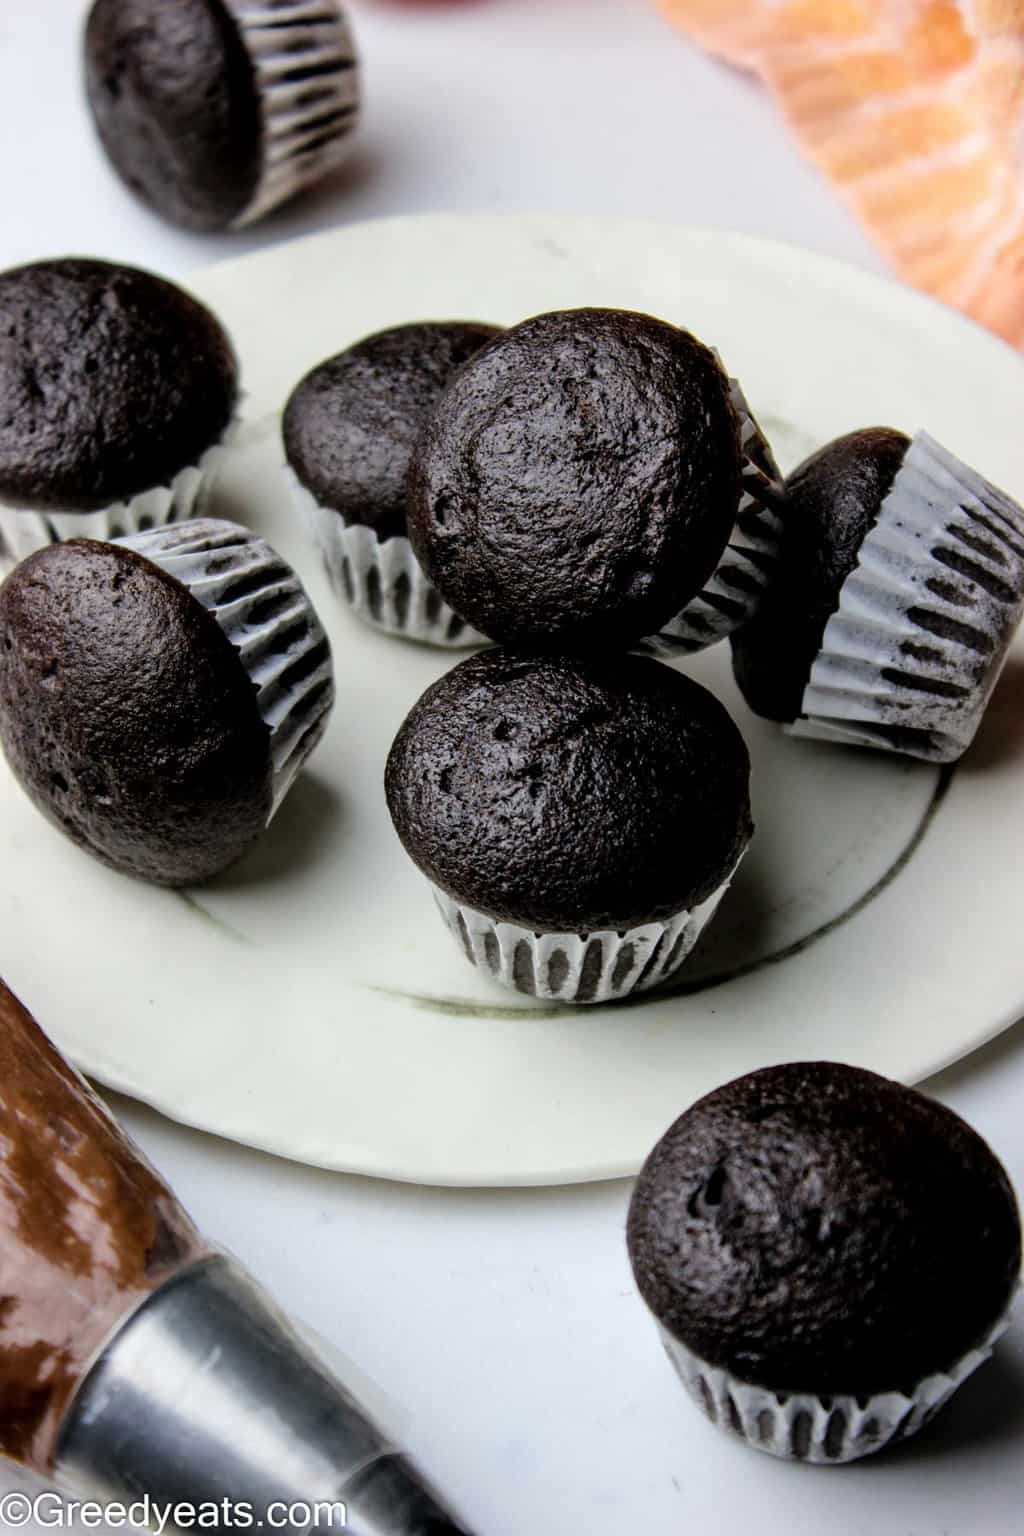 Super fluffy and moist chocolate cupcakes baked as mini chocolate cupcakes!